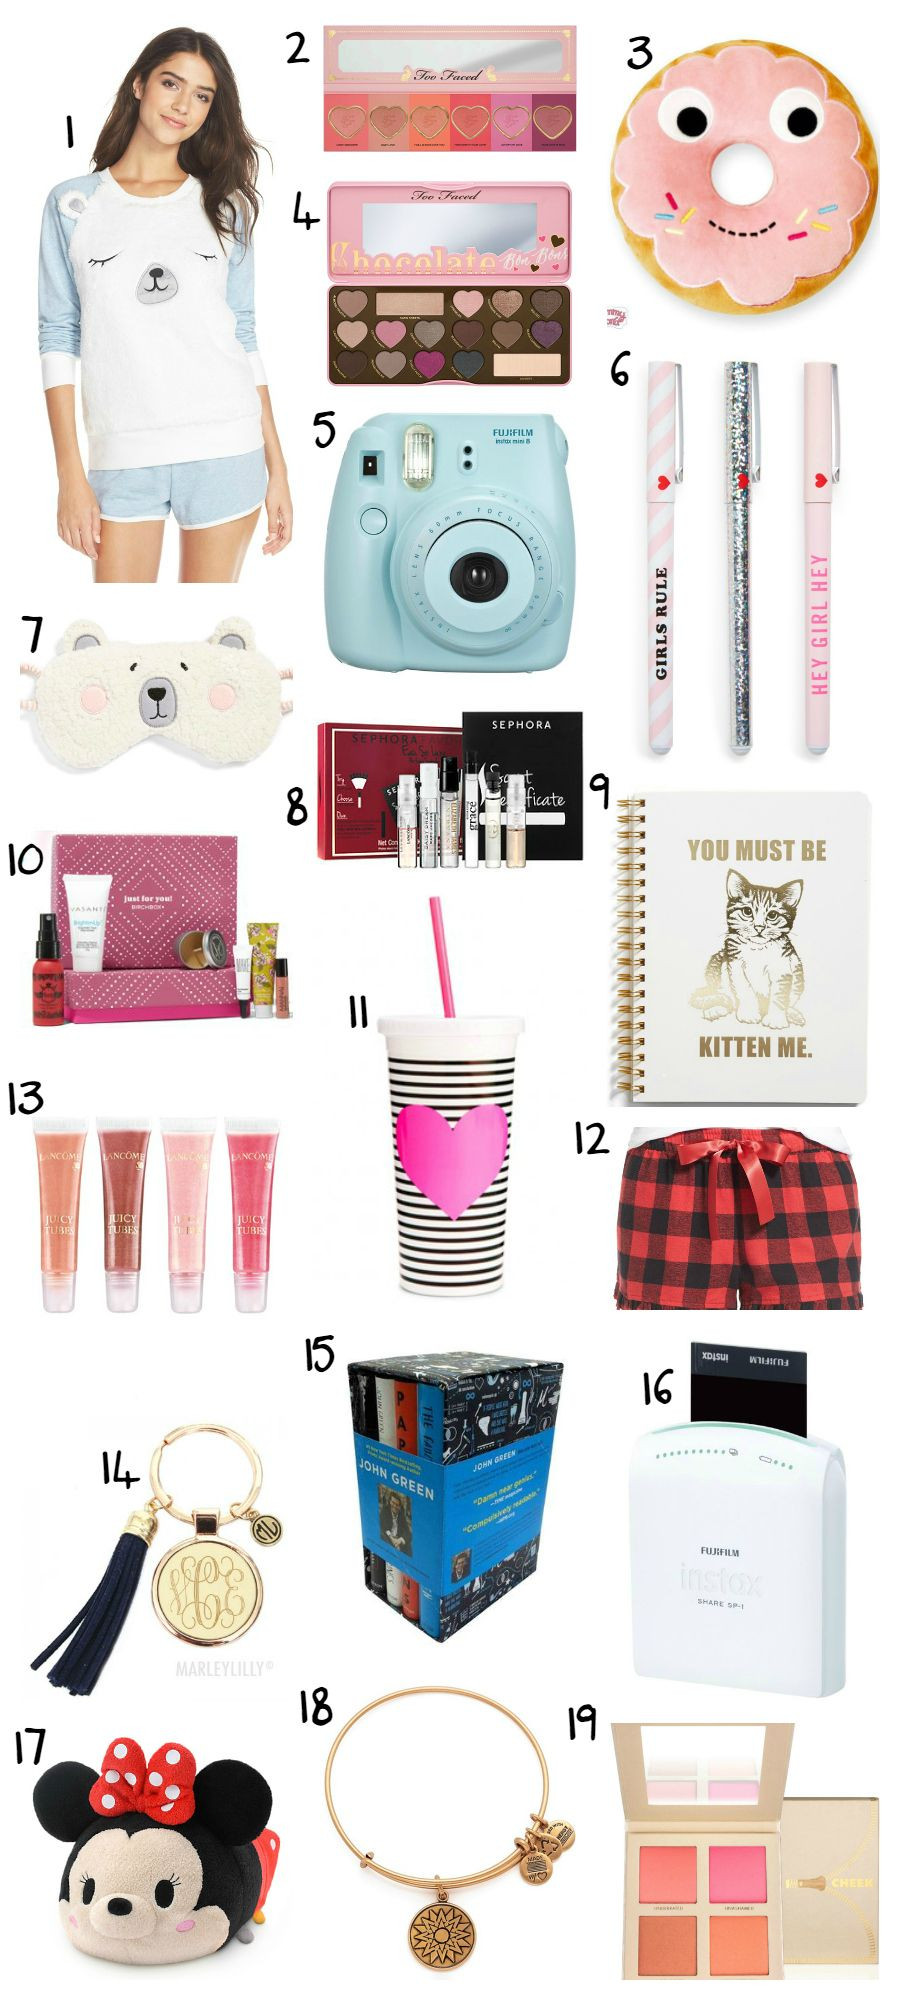 Christmas Gift Ideas For Teenage Girl
 The Best Christmas Gift Ideas for Teens